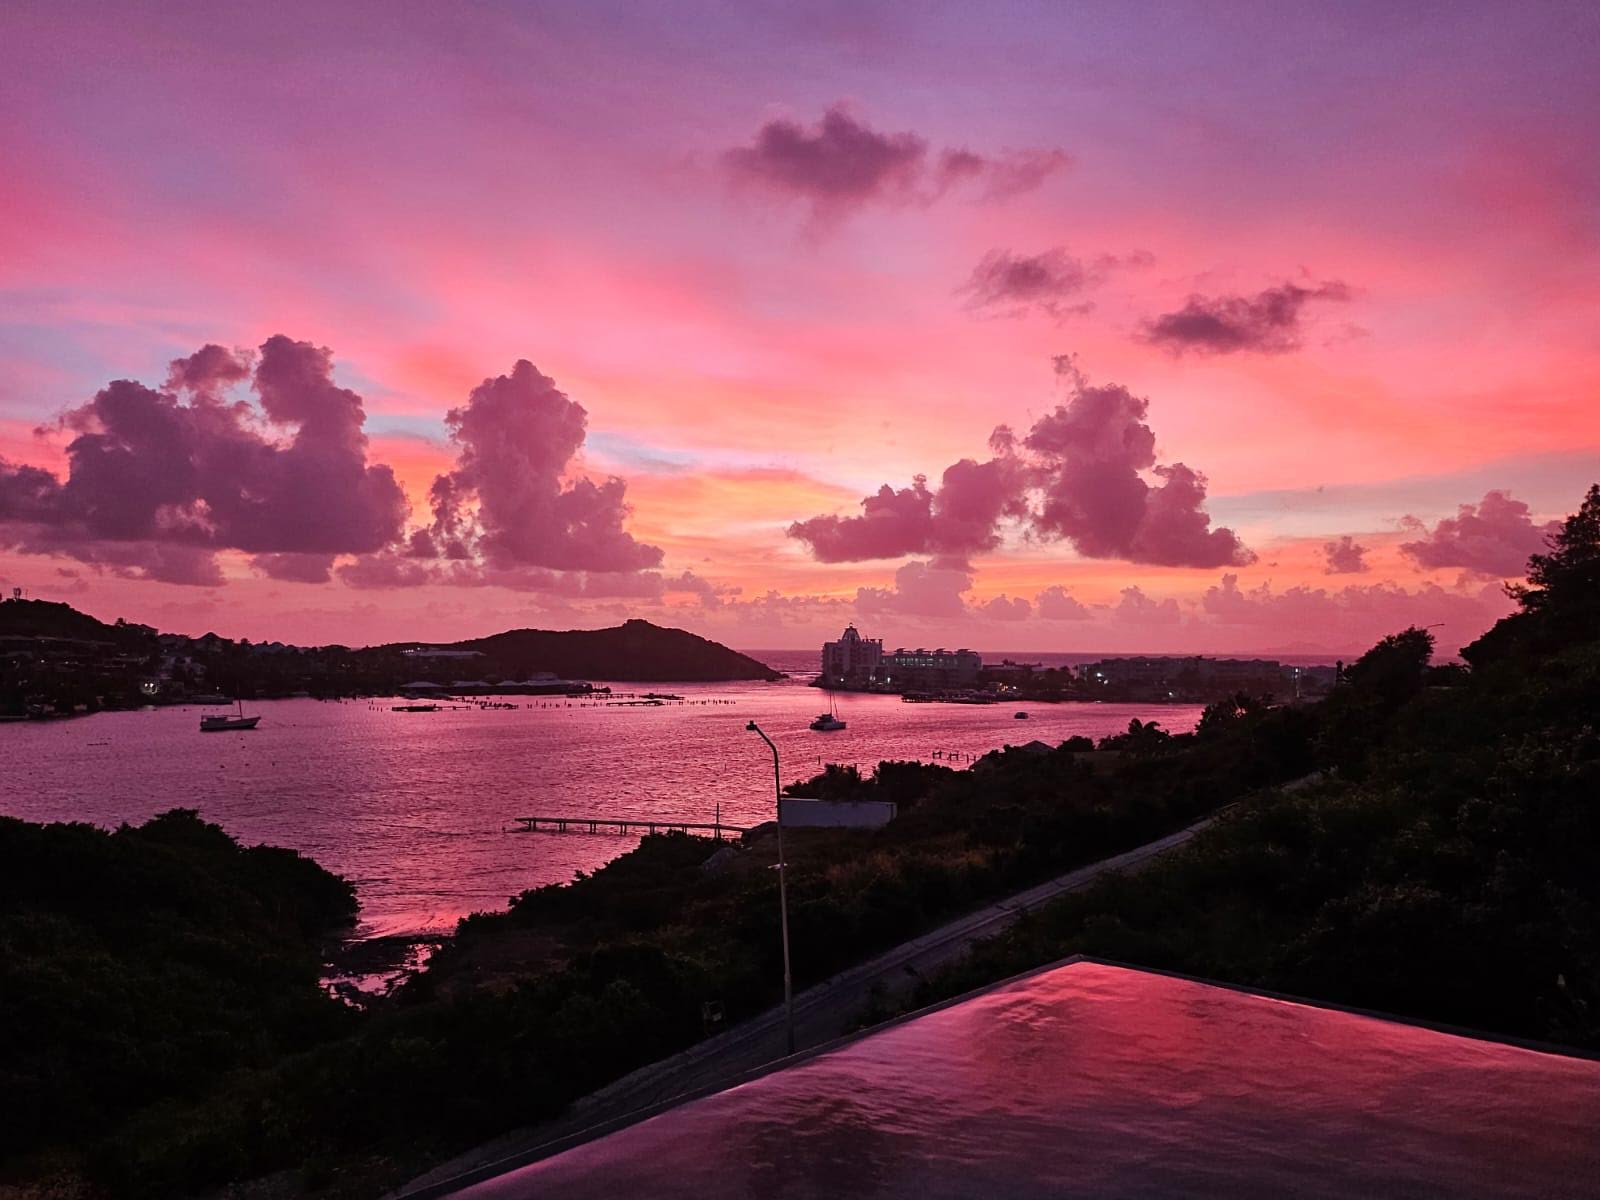 A view of a pink sky with grey clouds above the Oyster Pond, during the sunrise on St Maarten